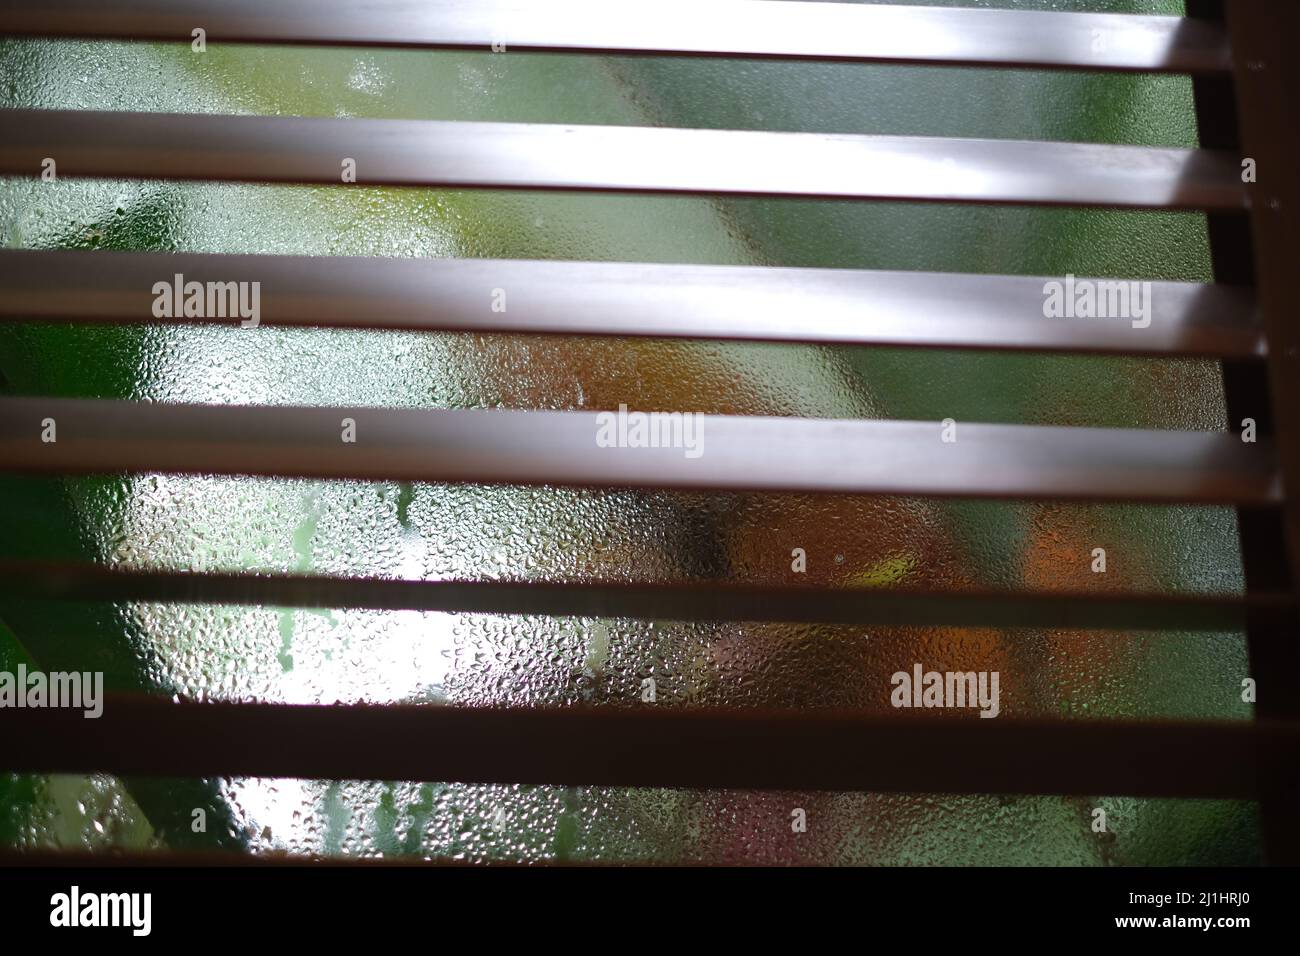 Half-closed wooden blinds with colorful fogged up window behind Stock Photo